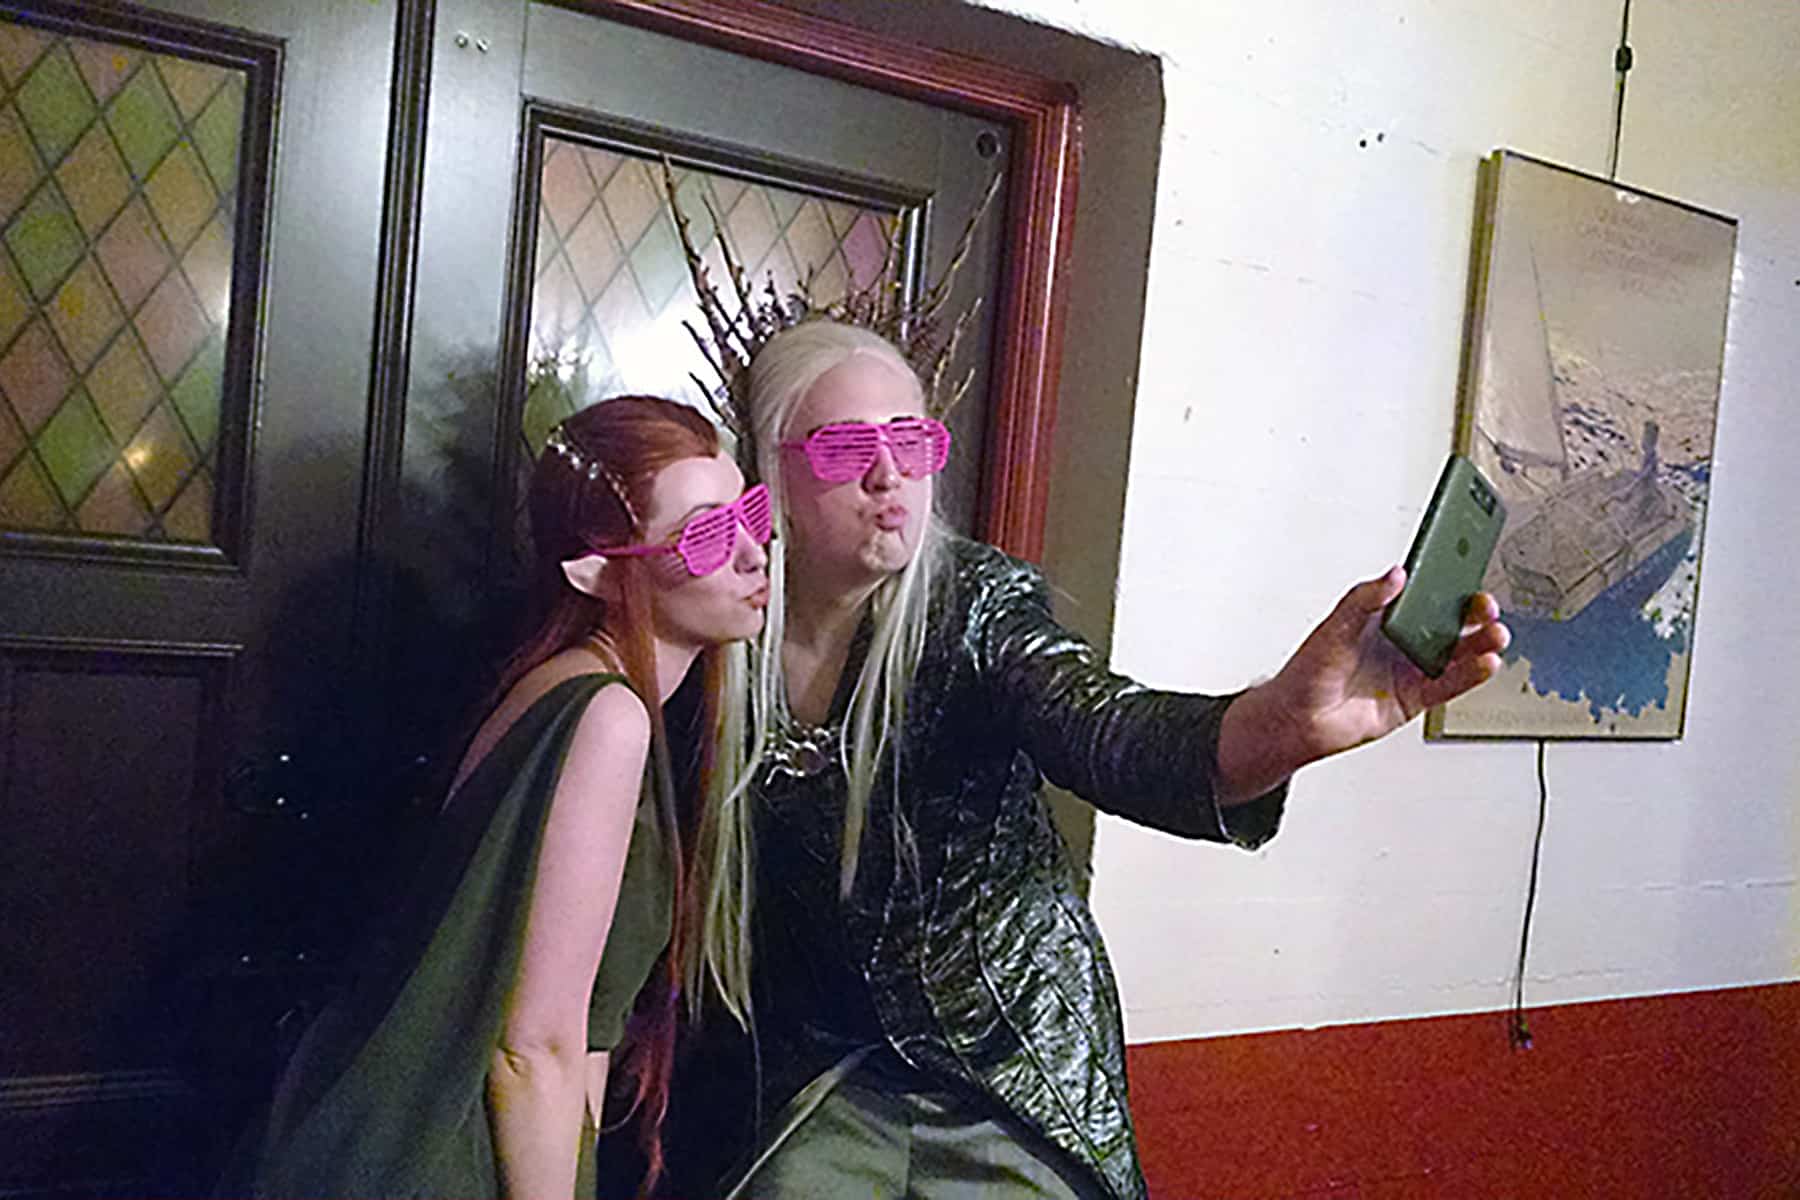 Two cosplayers dressed as Tolkien elves, taking a selfie together.